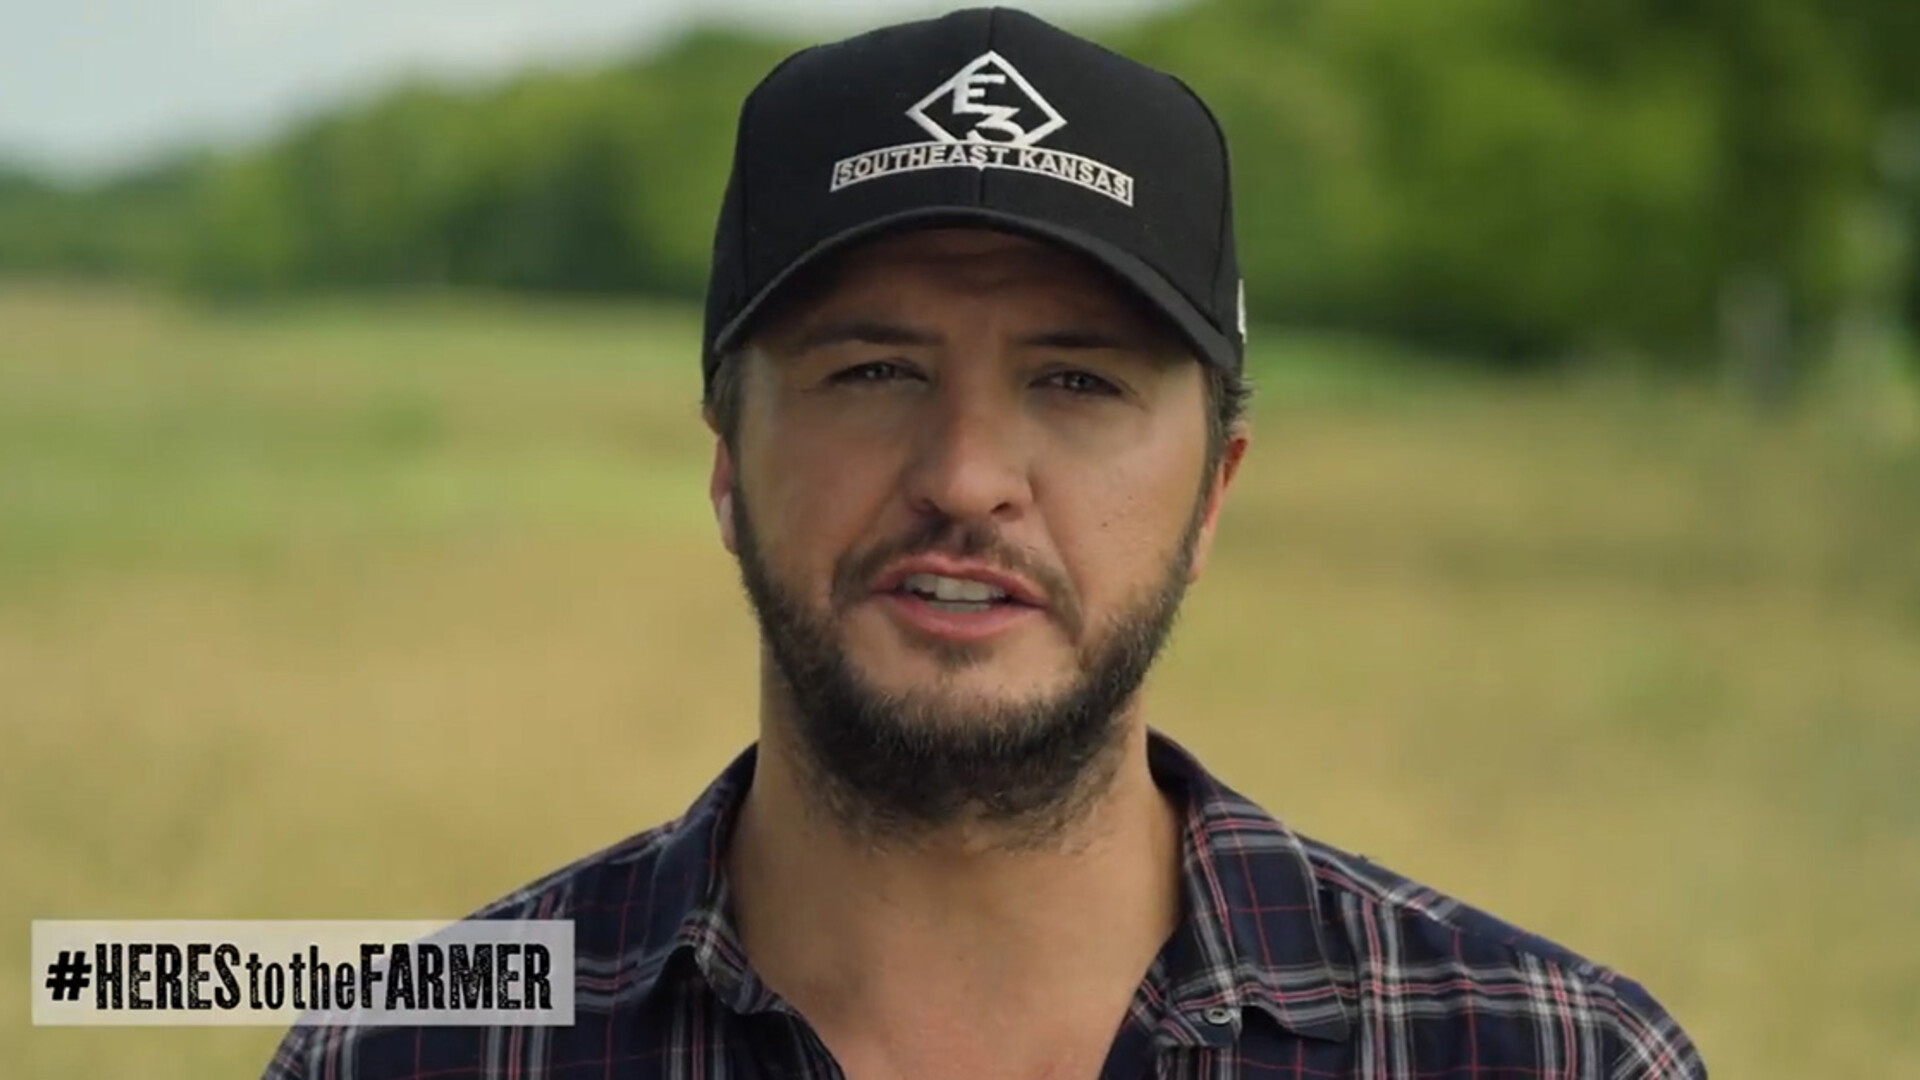 Luke Bryan and Bayer Team Up for 'Here's to the Farmer' Campaign